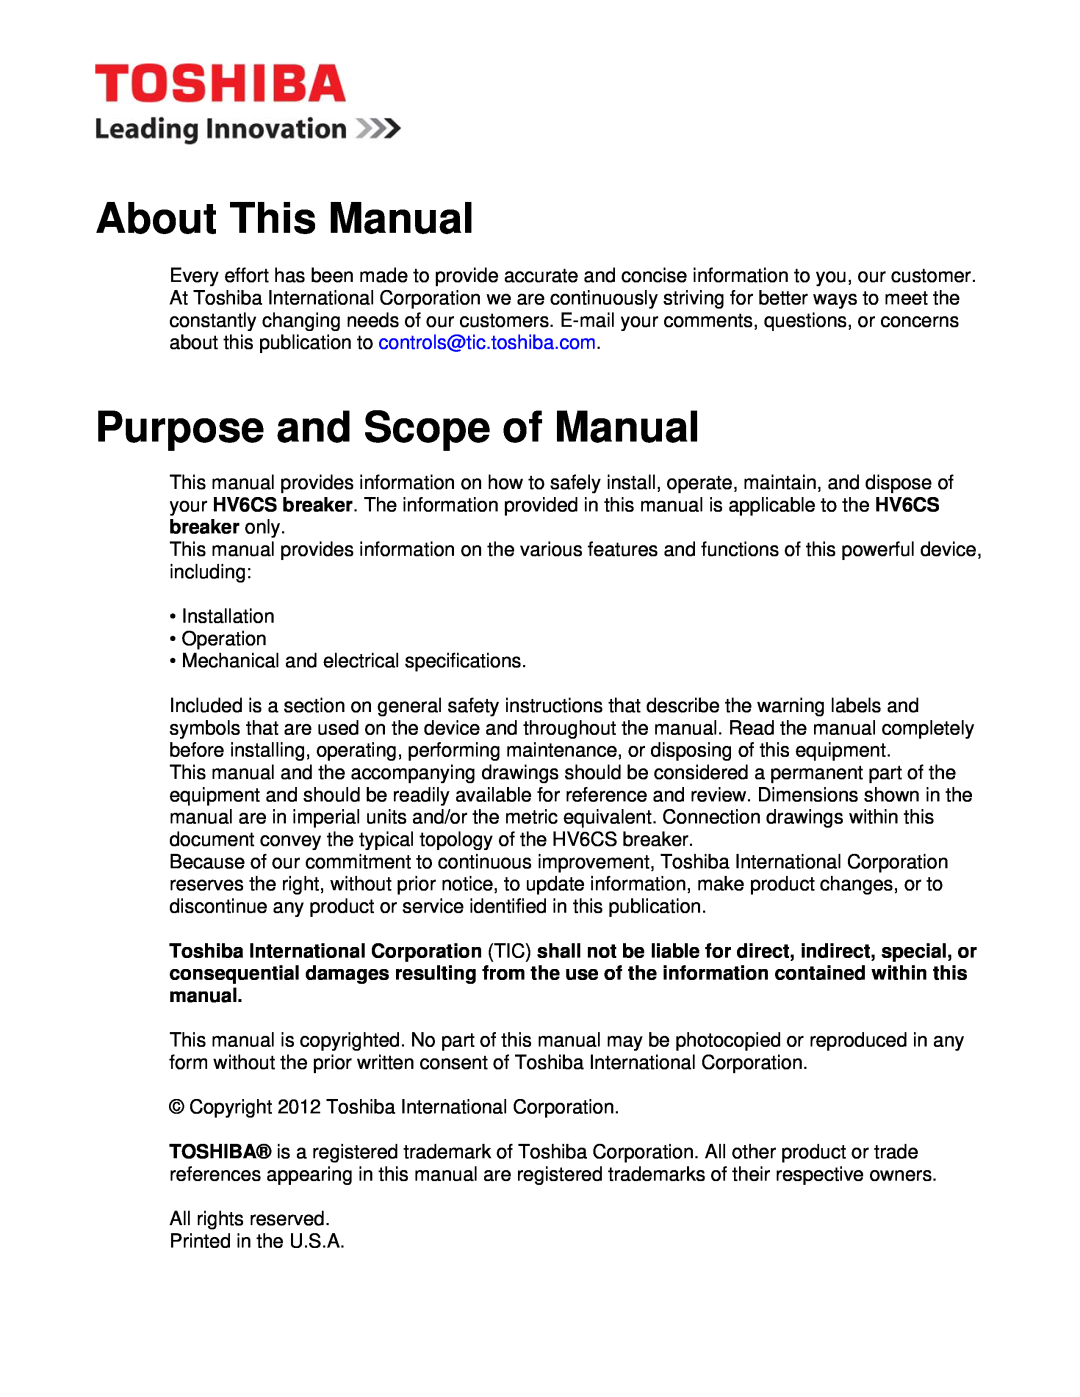 Toshiba HV6CS-MLD, H6A-HLS operation manual About This Manual, Purpose and Scope of Manual 